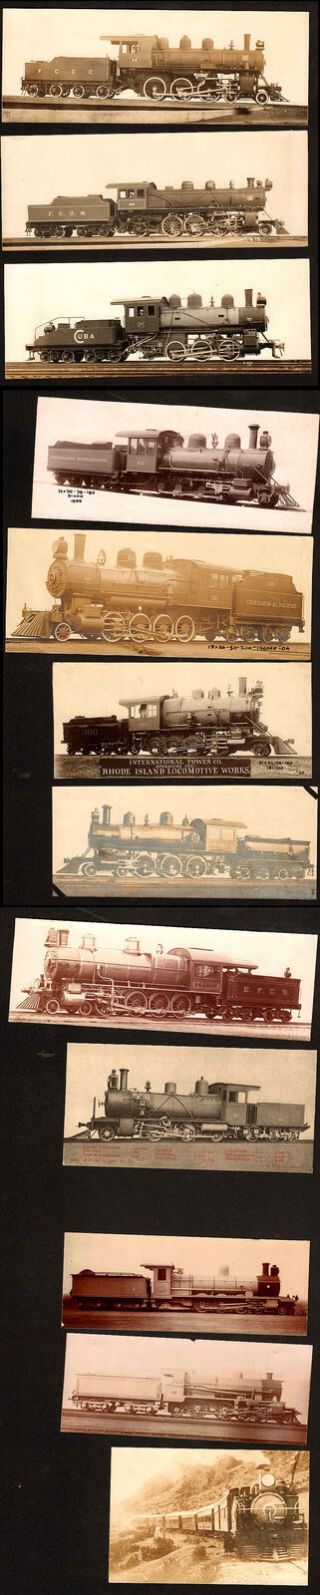 12 Old Steam Locomotive Photos From Cuba,  Mexico,  Argentina & Brazil